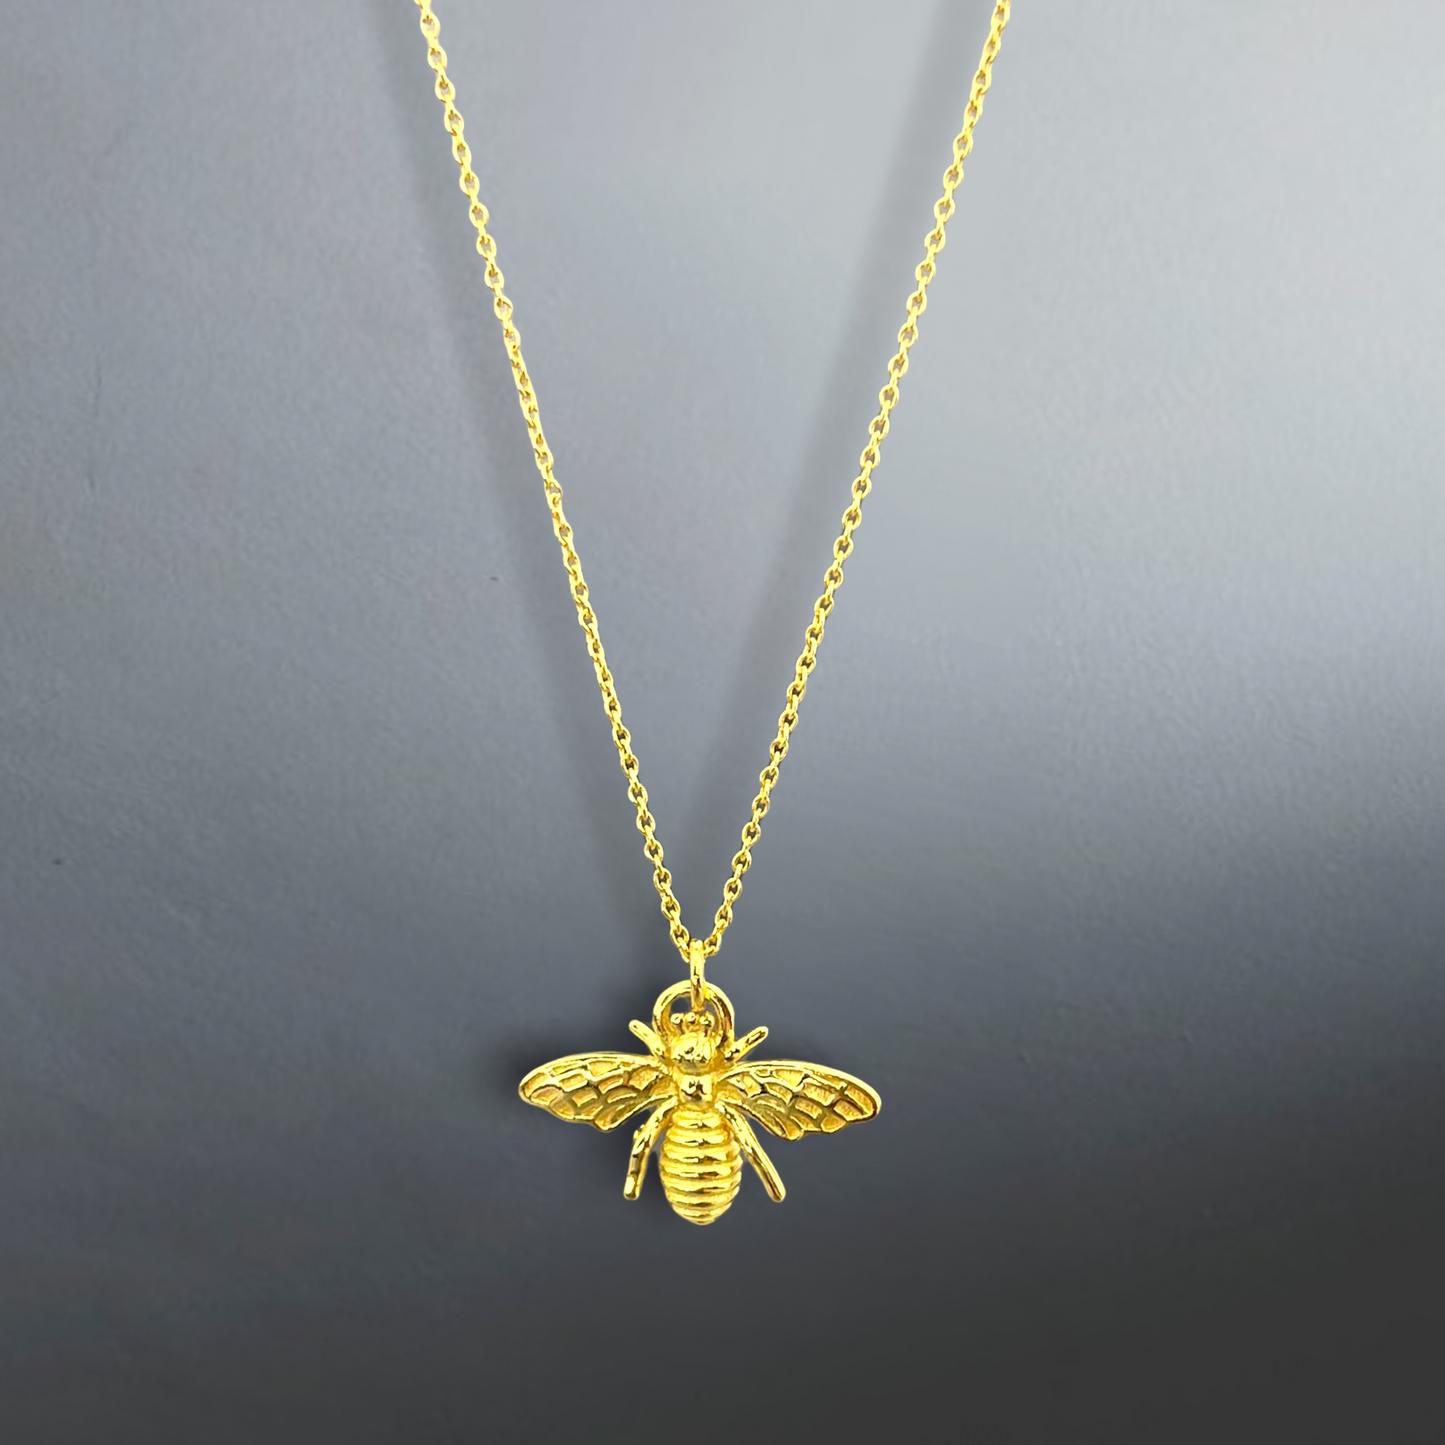 Golden bee 925 sterling gilded chain - gift idea for hard-working bees - K925-59